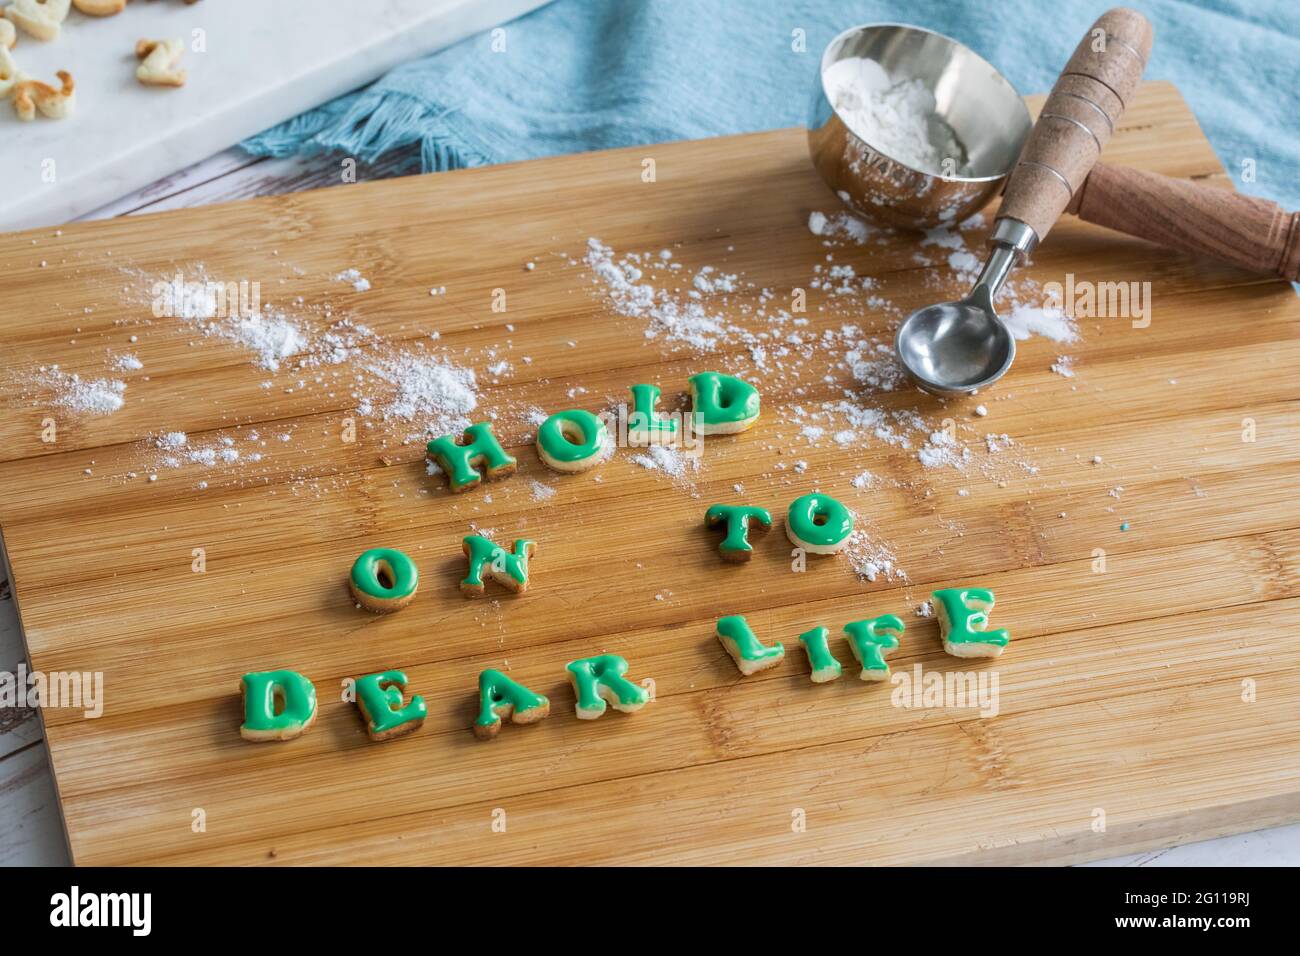 Hold on to dear life written with cookies on a wooden cutting board with measuring spoons and flour on a table with a blue cloth Stock Photo